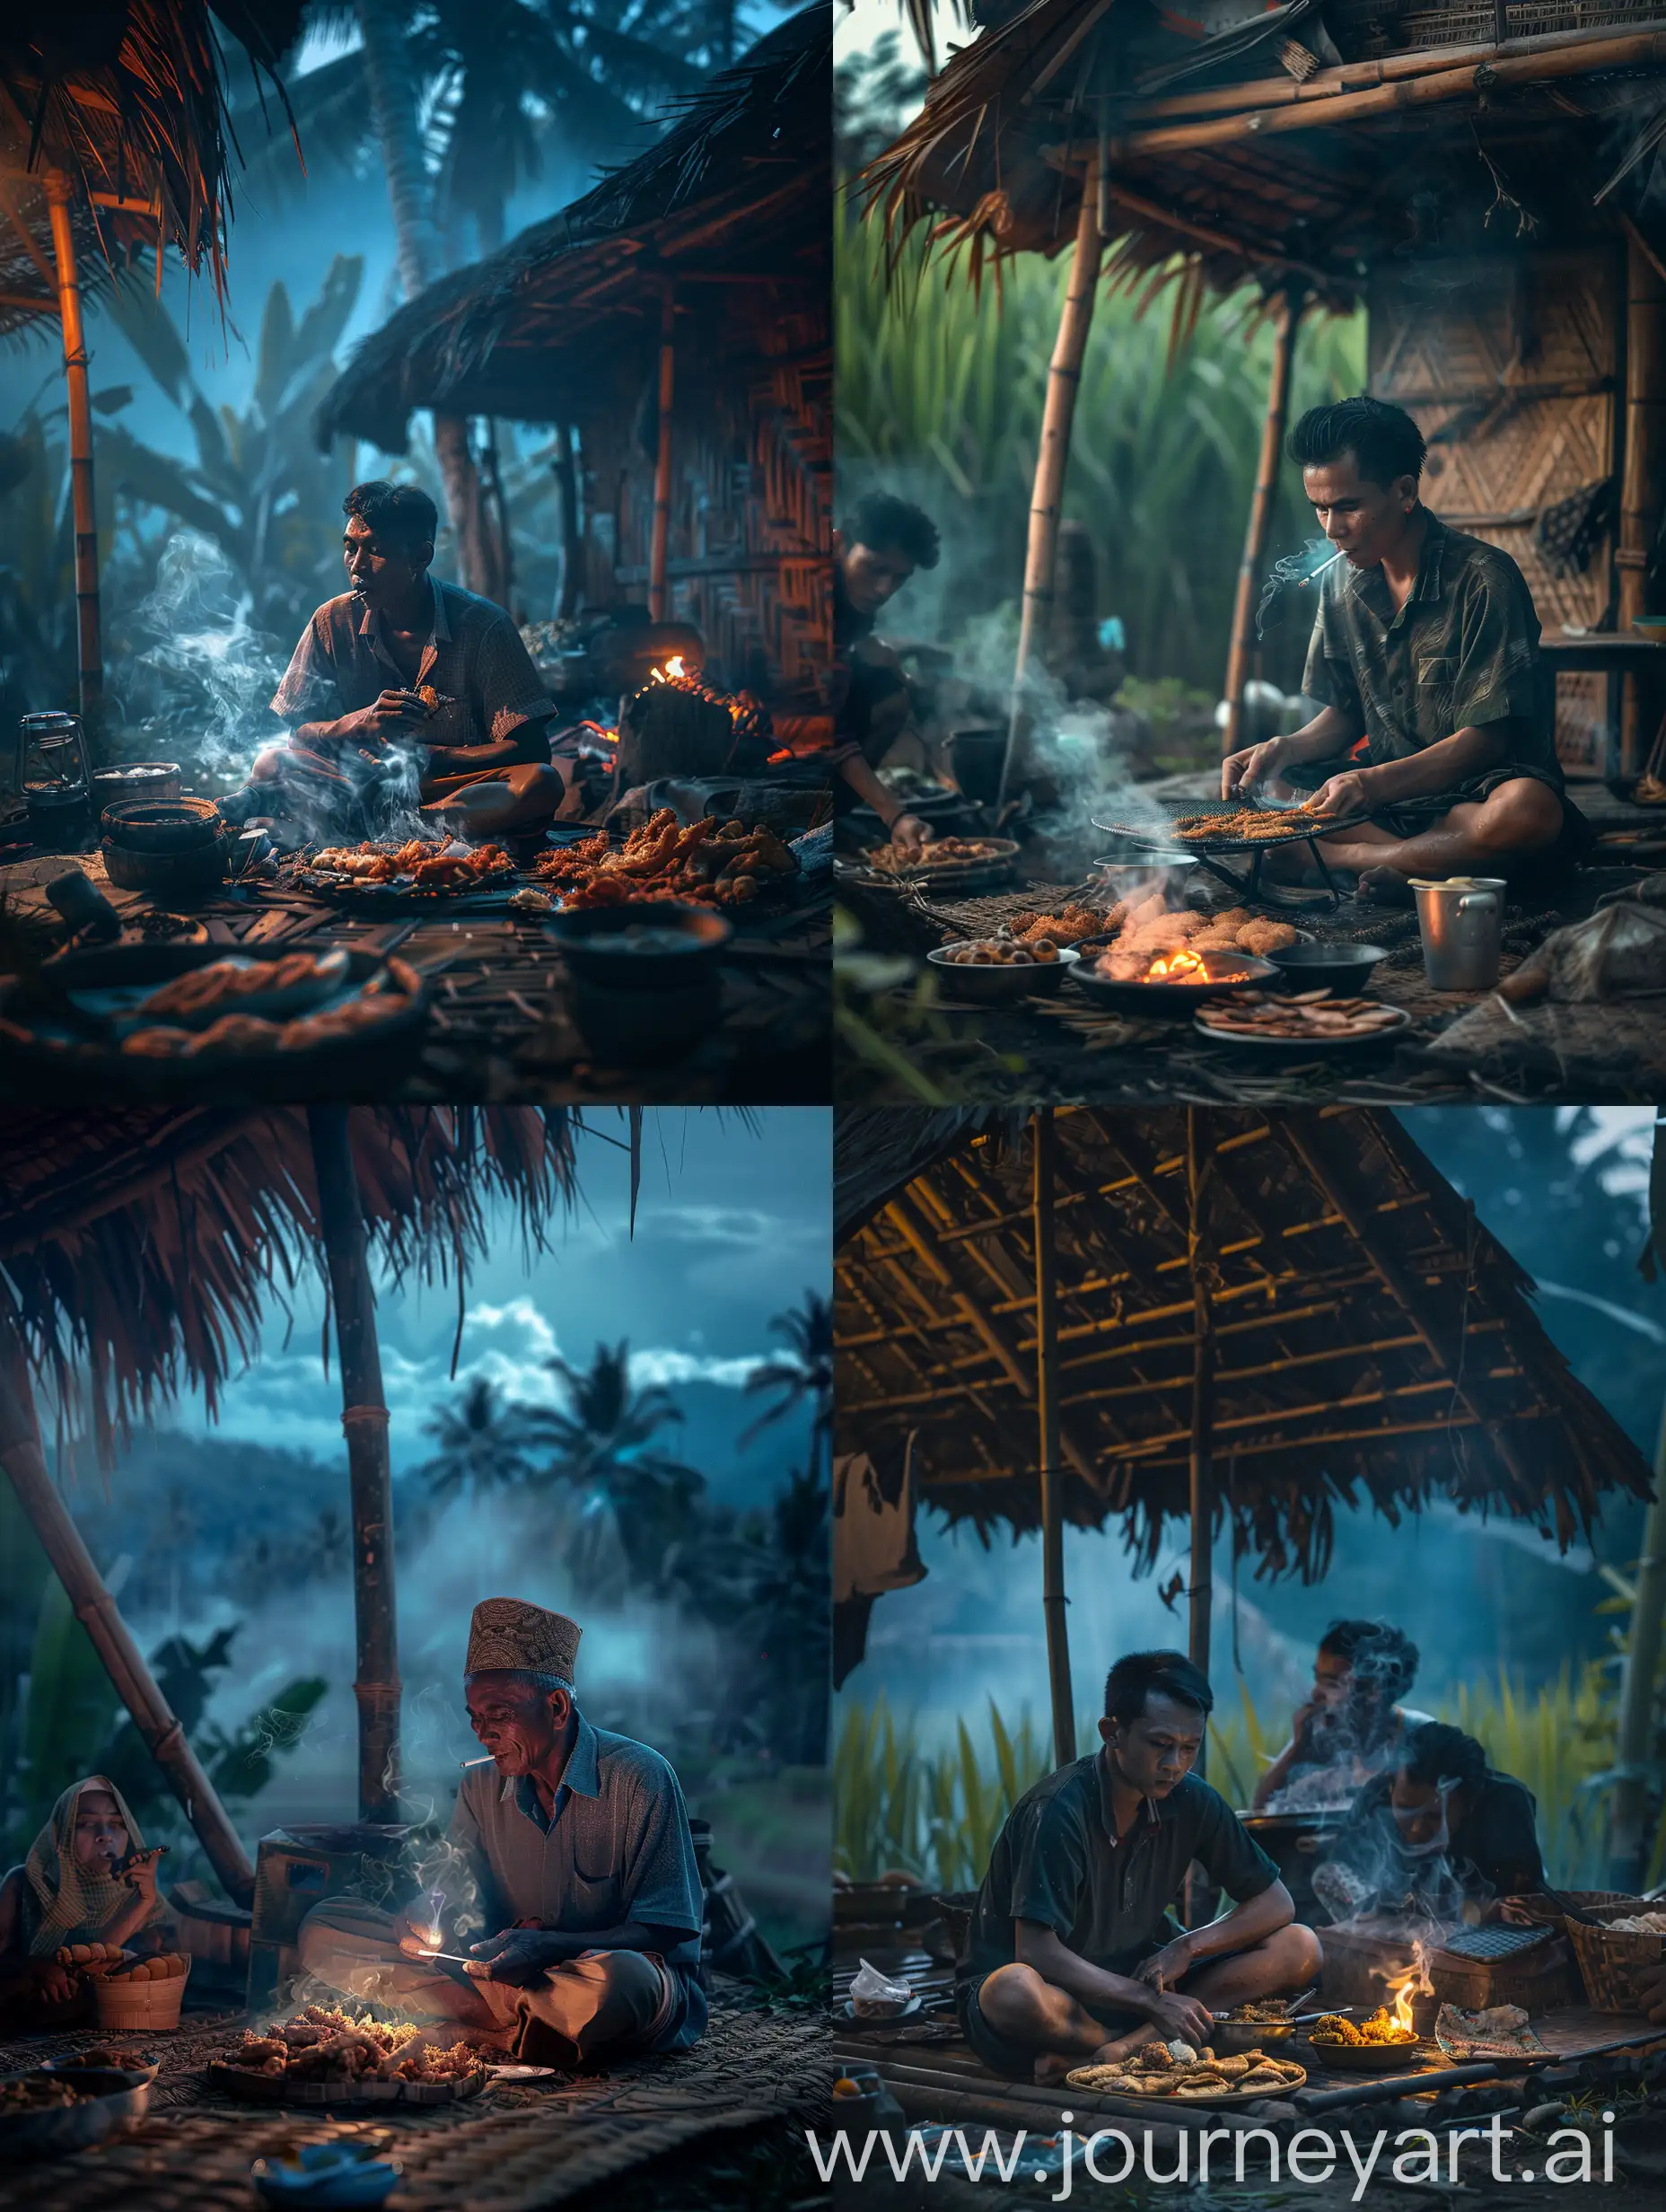 Indonesian-Muslim-Man-Smoking-by-Bamboo-House-with-Fried-Foods-and-Coffee